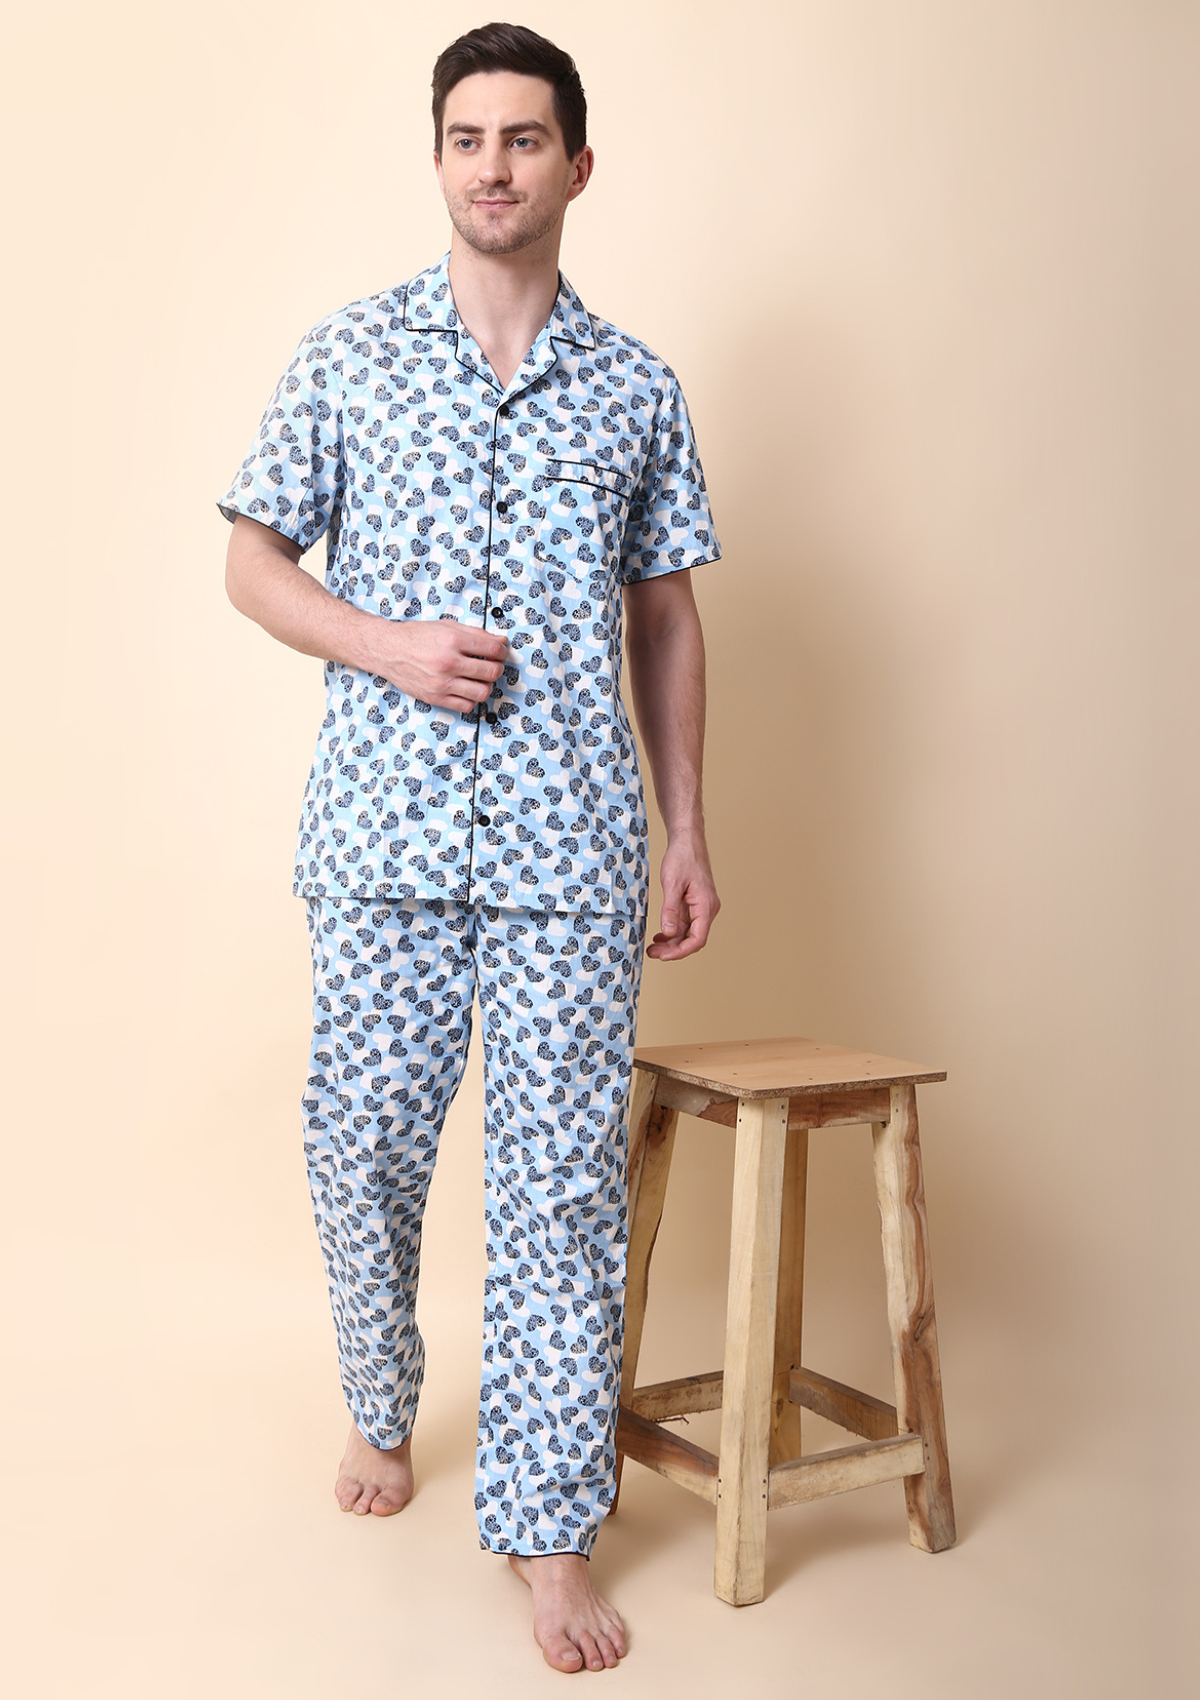 Summer Ice Silk Couple Pajama Set For Men And Women Thin Skirt Satin Night  Robe And Long Sleeved Top For Comfortable Home Wear And Lounging From  Jiuwocute, $23.51 | DHgate.Com